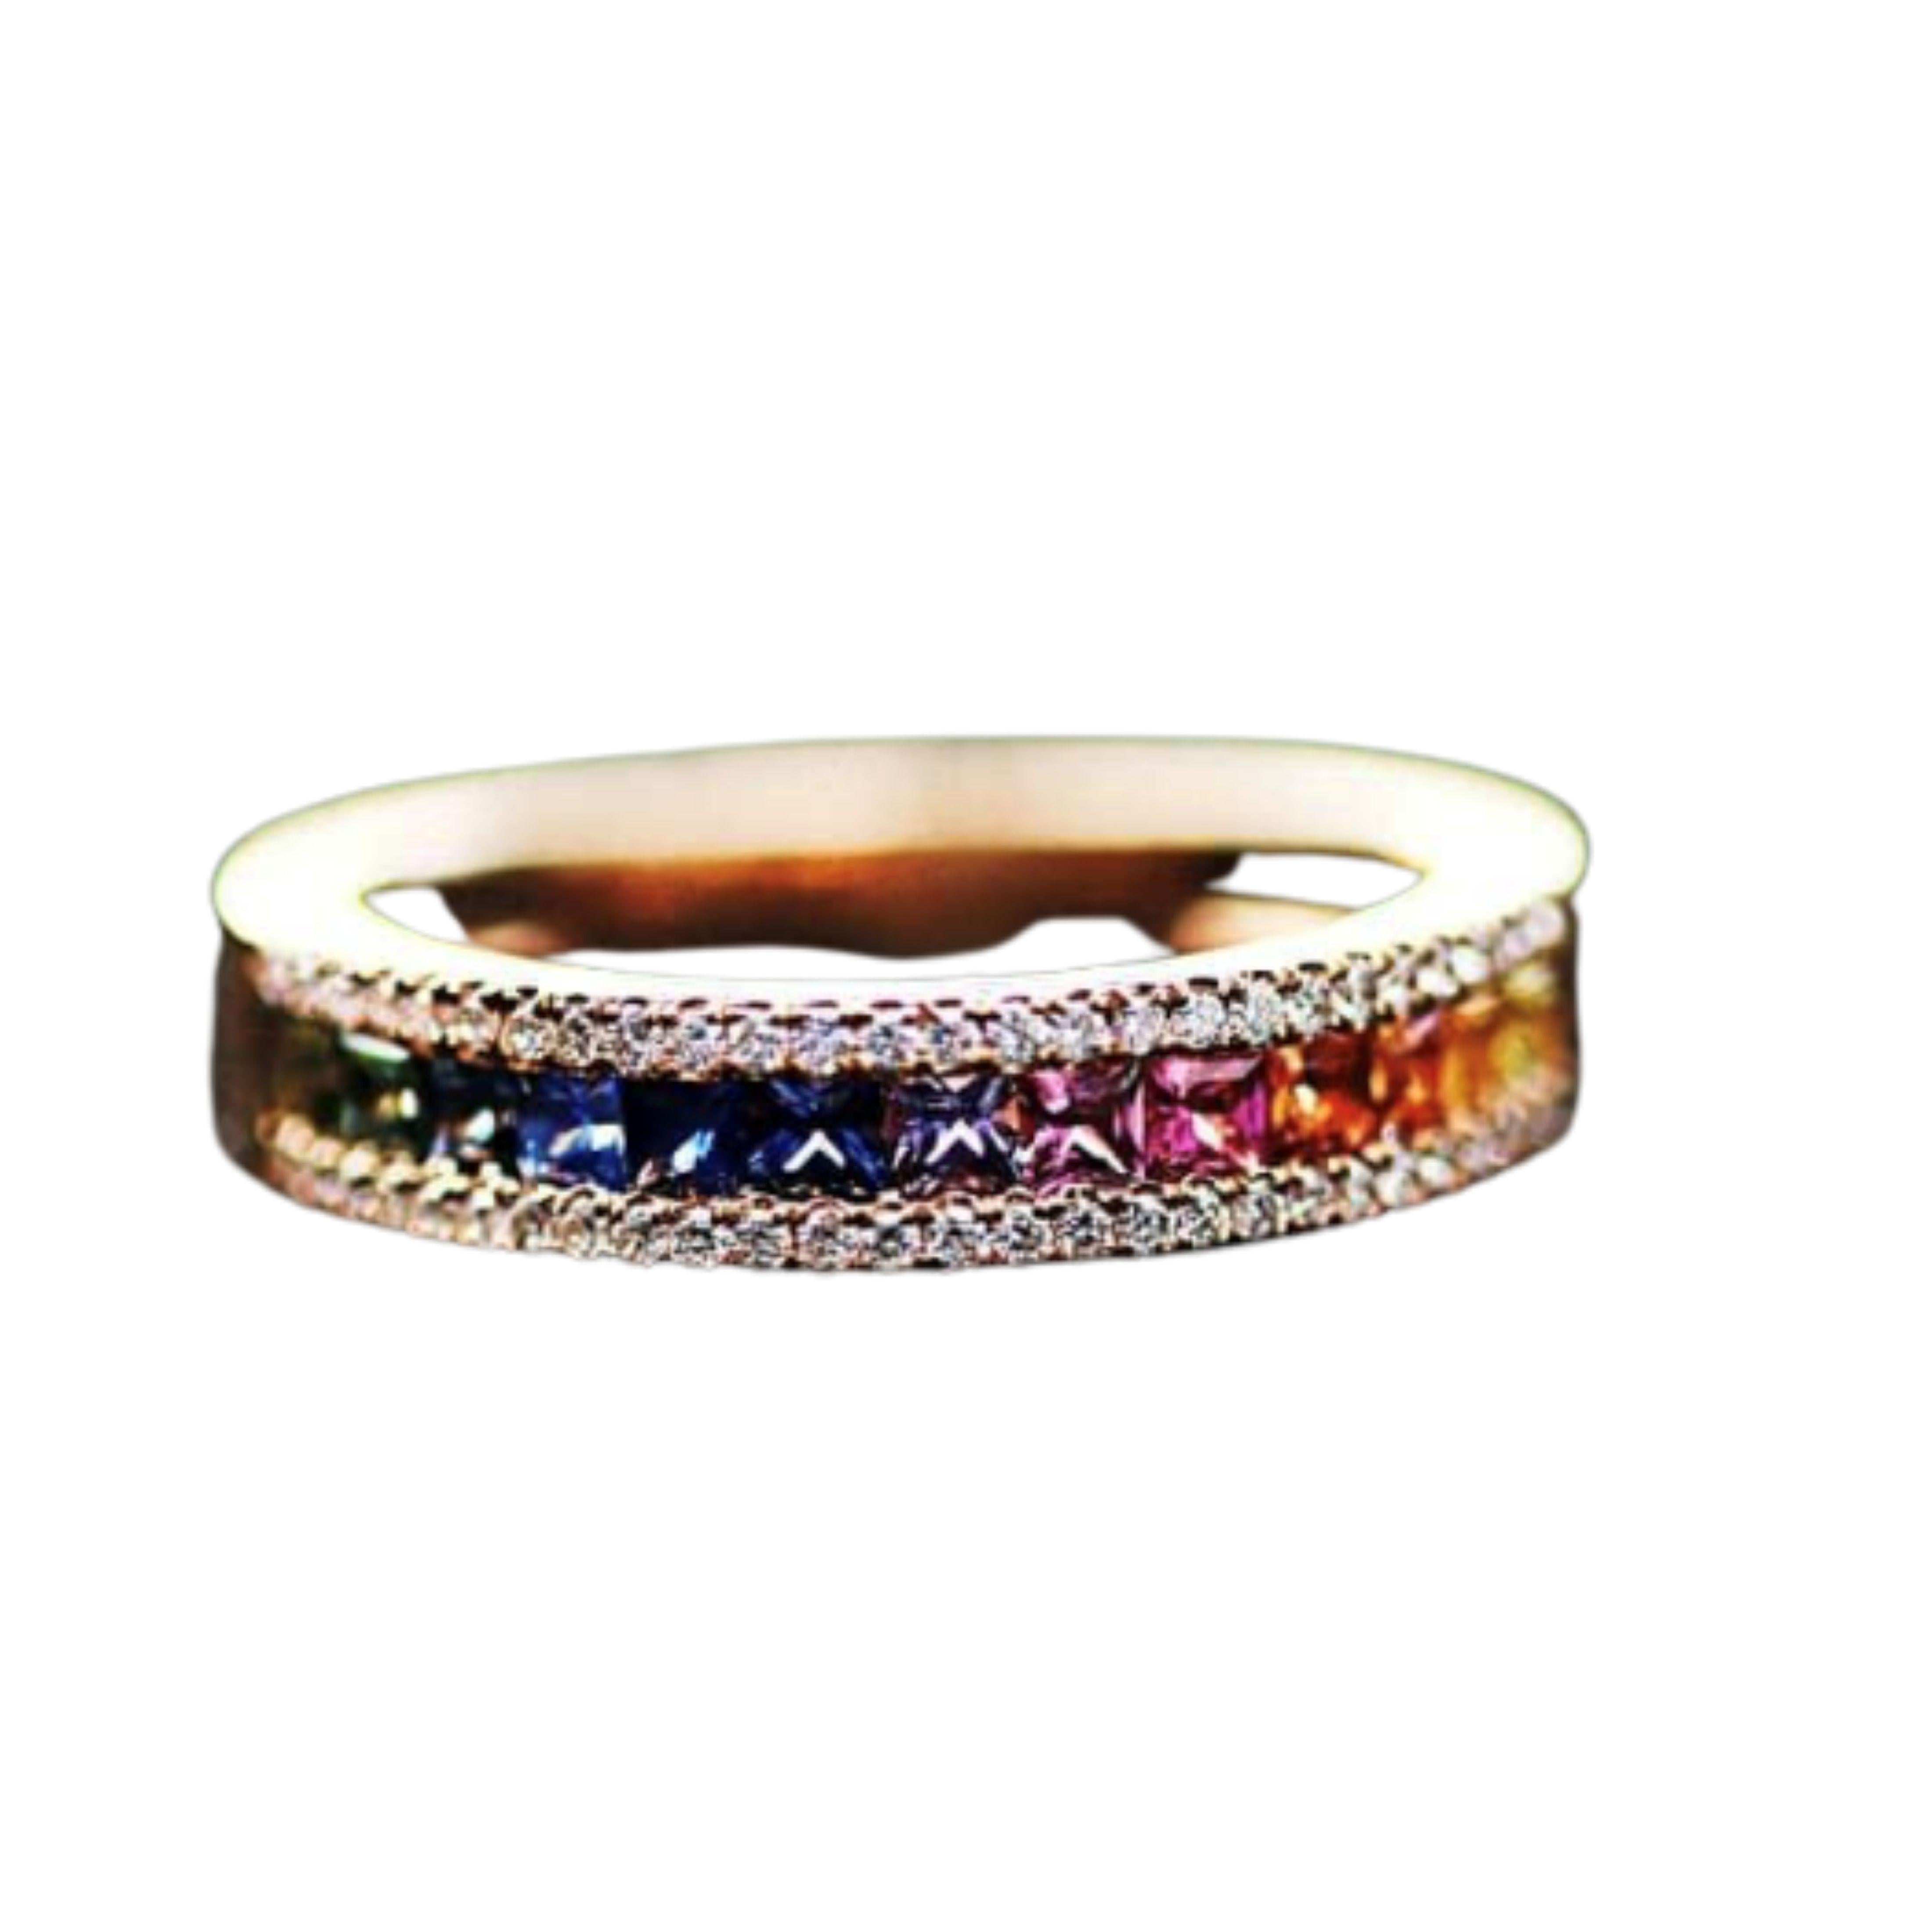 An exquisitely crafted coloured sapphire and diamond eternity ring, as unique as you. Perfectly curated coloured sapphires hand selected in Ceylon are set between two rows of sparkling highest grade diamonds. Your choice of either traditional round